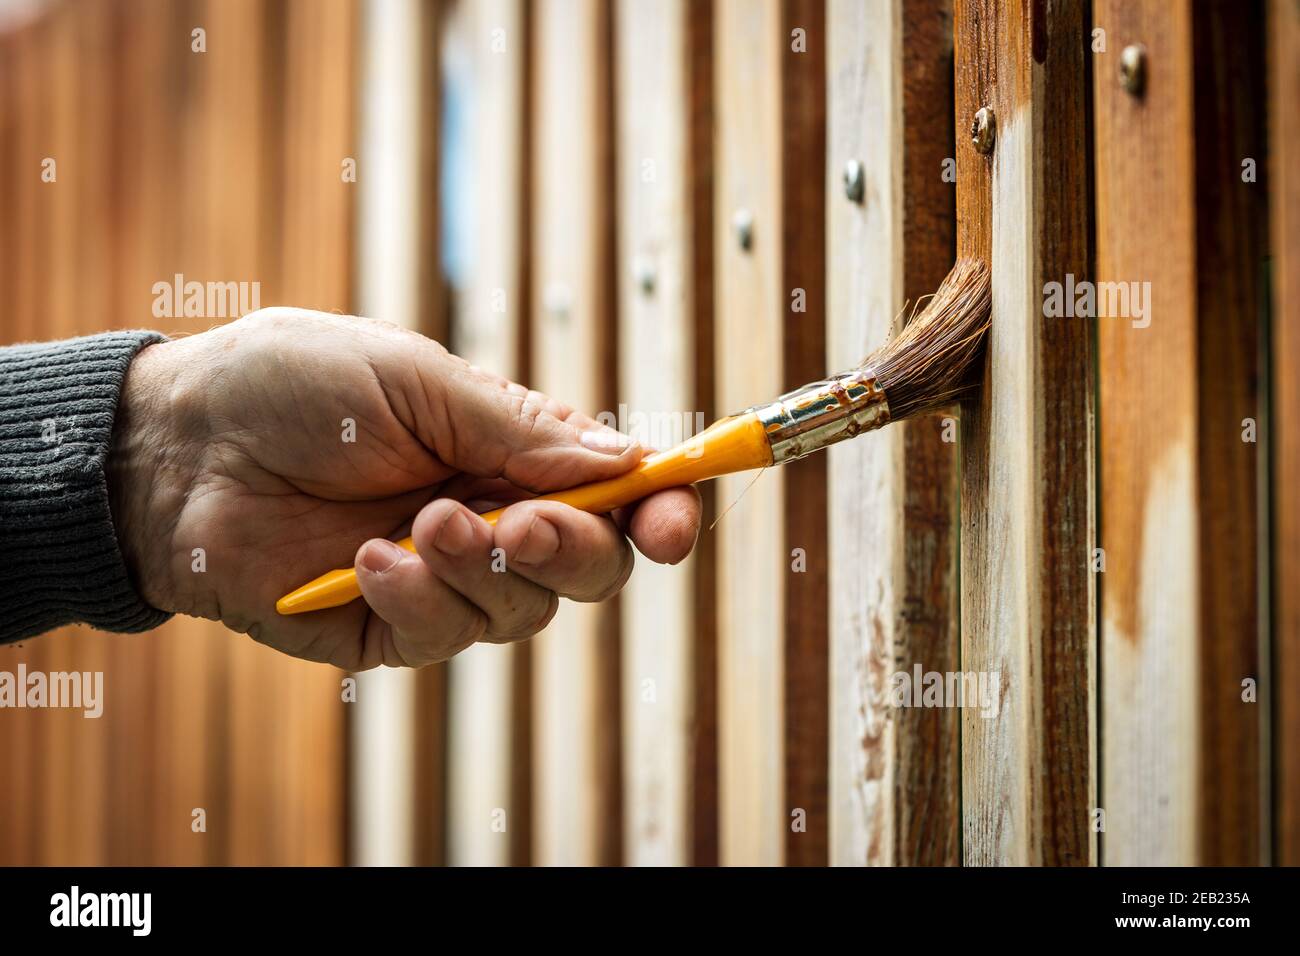 Man painting wooden fence by wood stain. Renovation of picket fence. Paintbrush in male hand Stock Photo